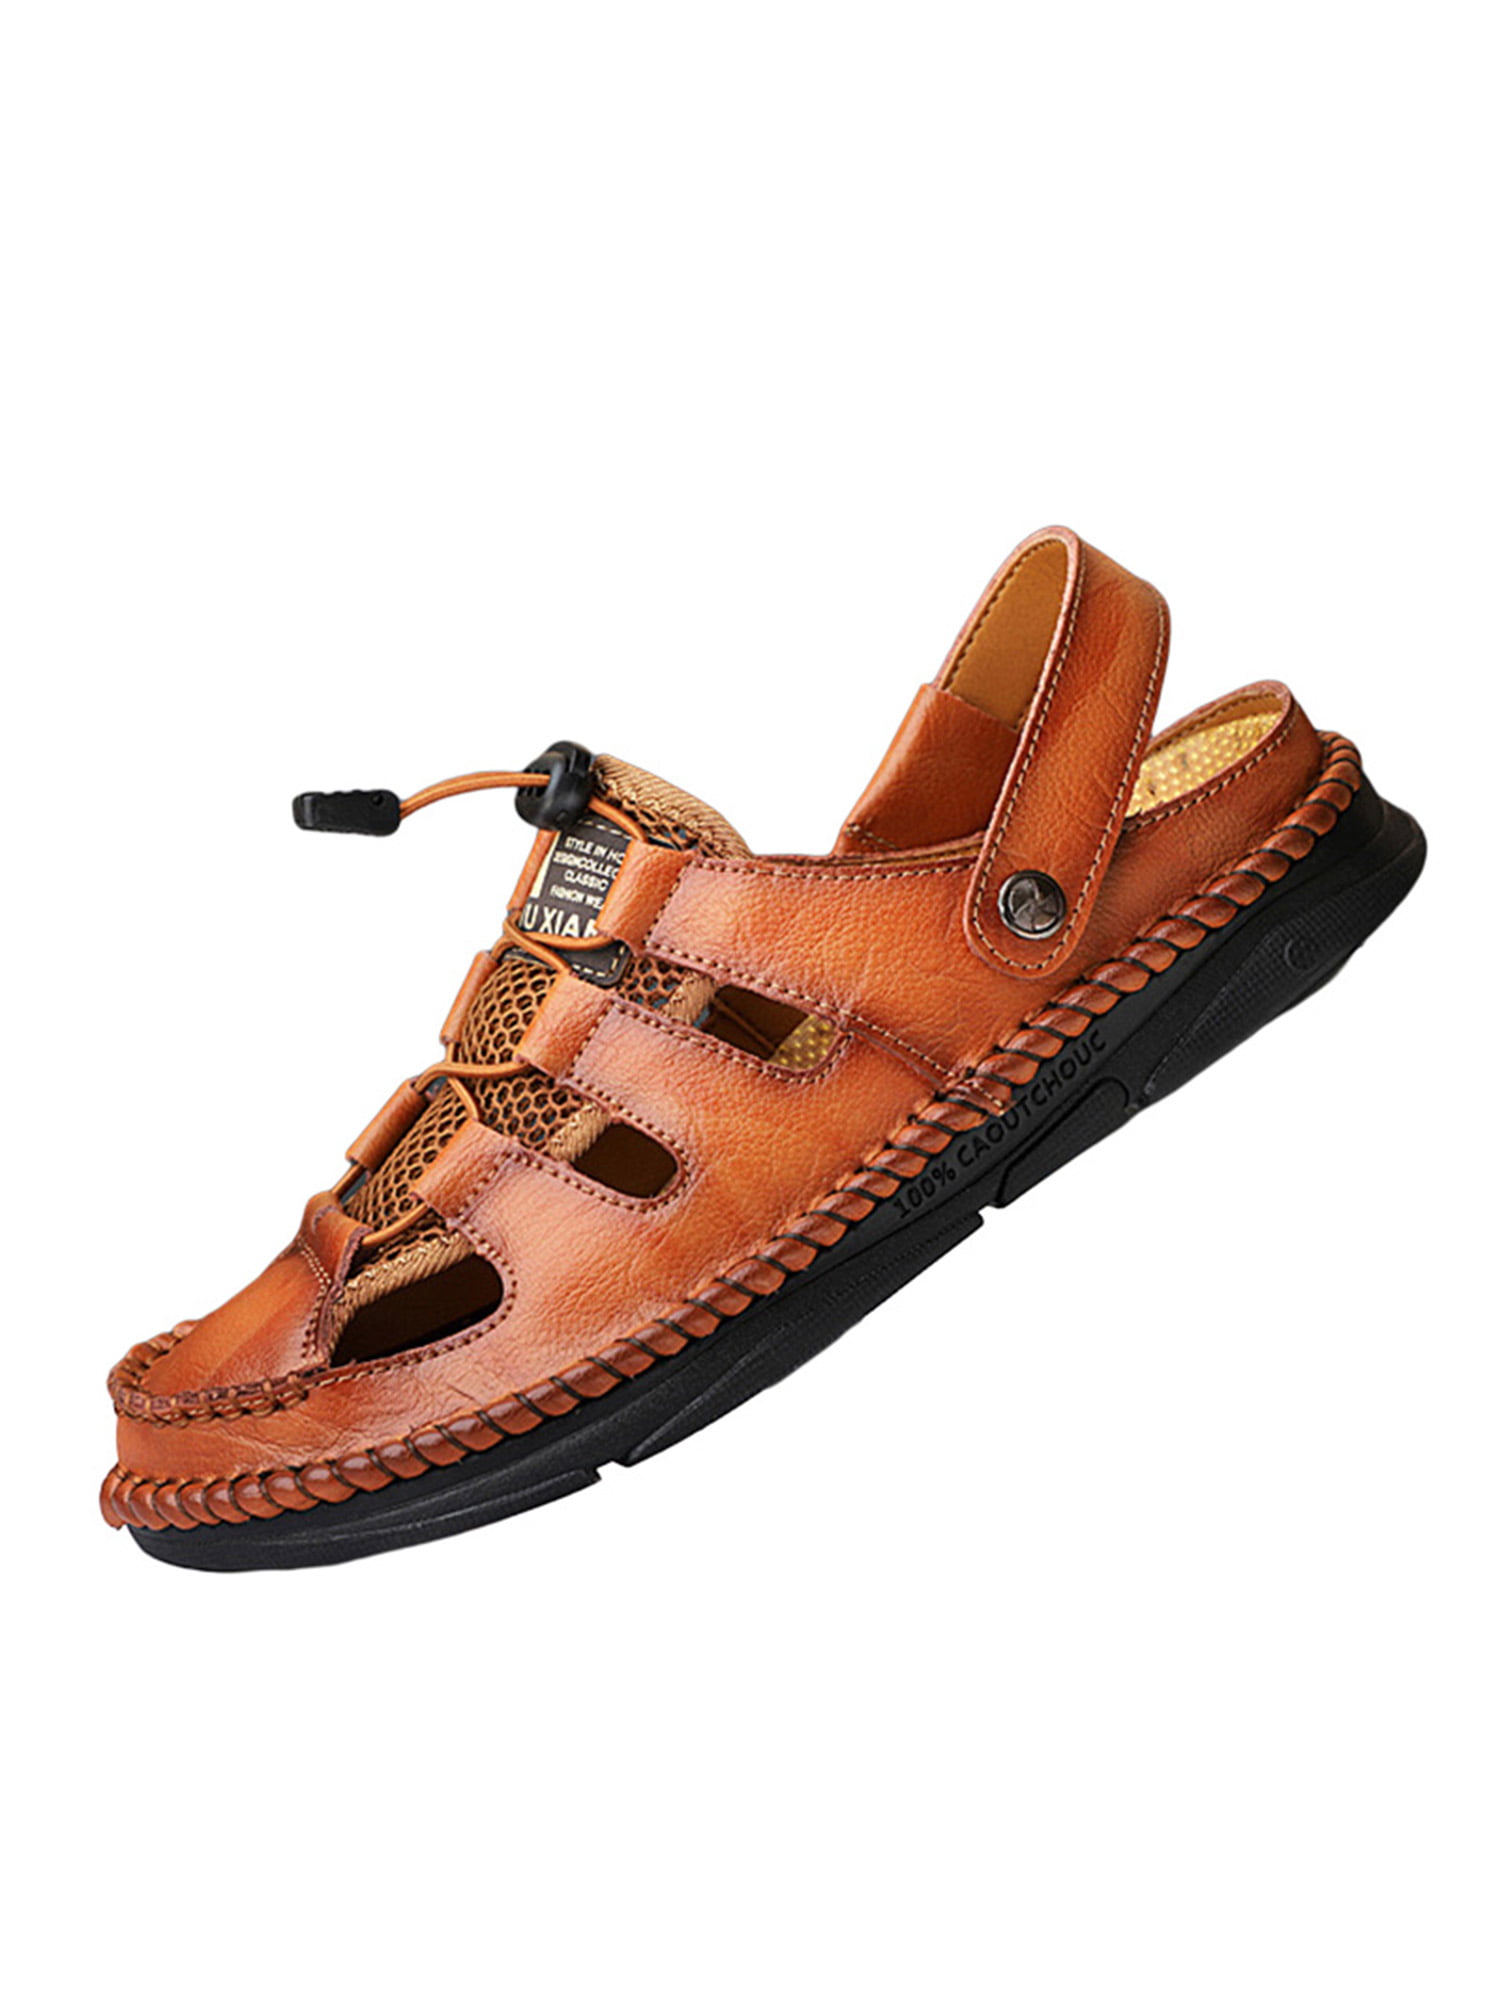 Mens Sports Leather Sandals Outdoor Flat Comfy Breathable Summer Slippers Casual 